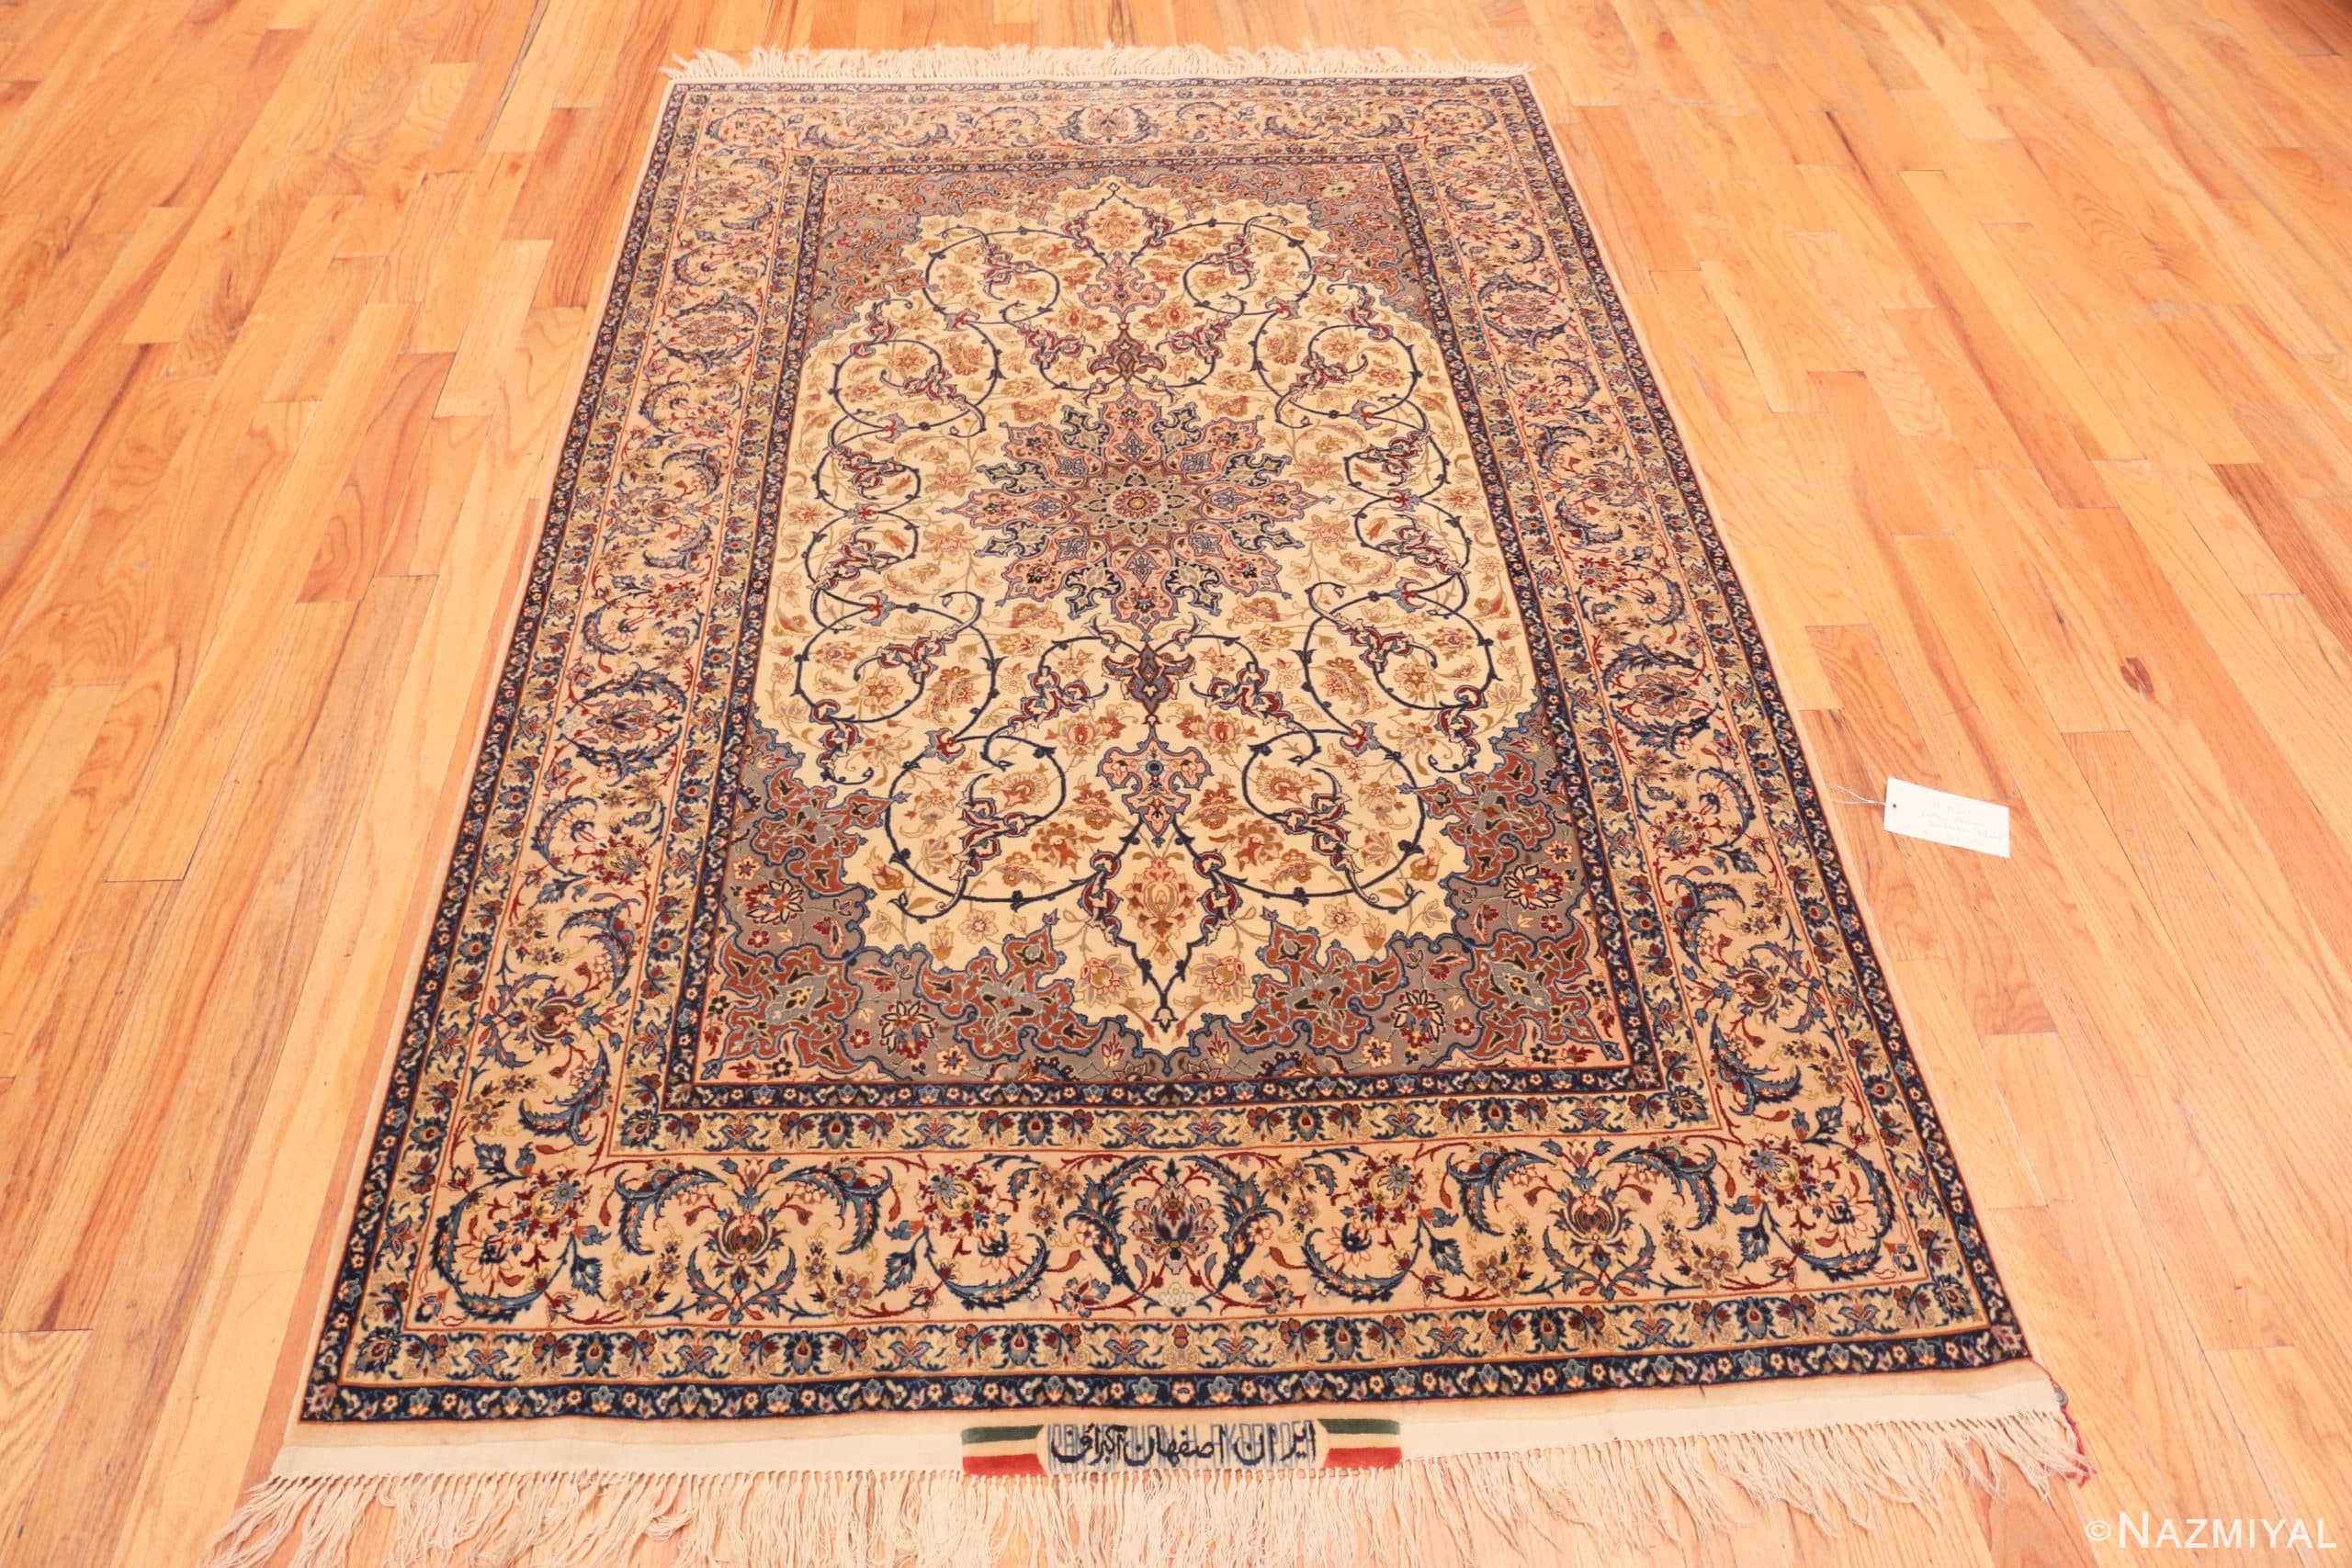 Whole View Of Magnificent Vintage Persian Floral Isfahan Rug 71203 by Nazmiyal Antique Rugs